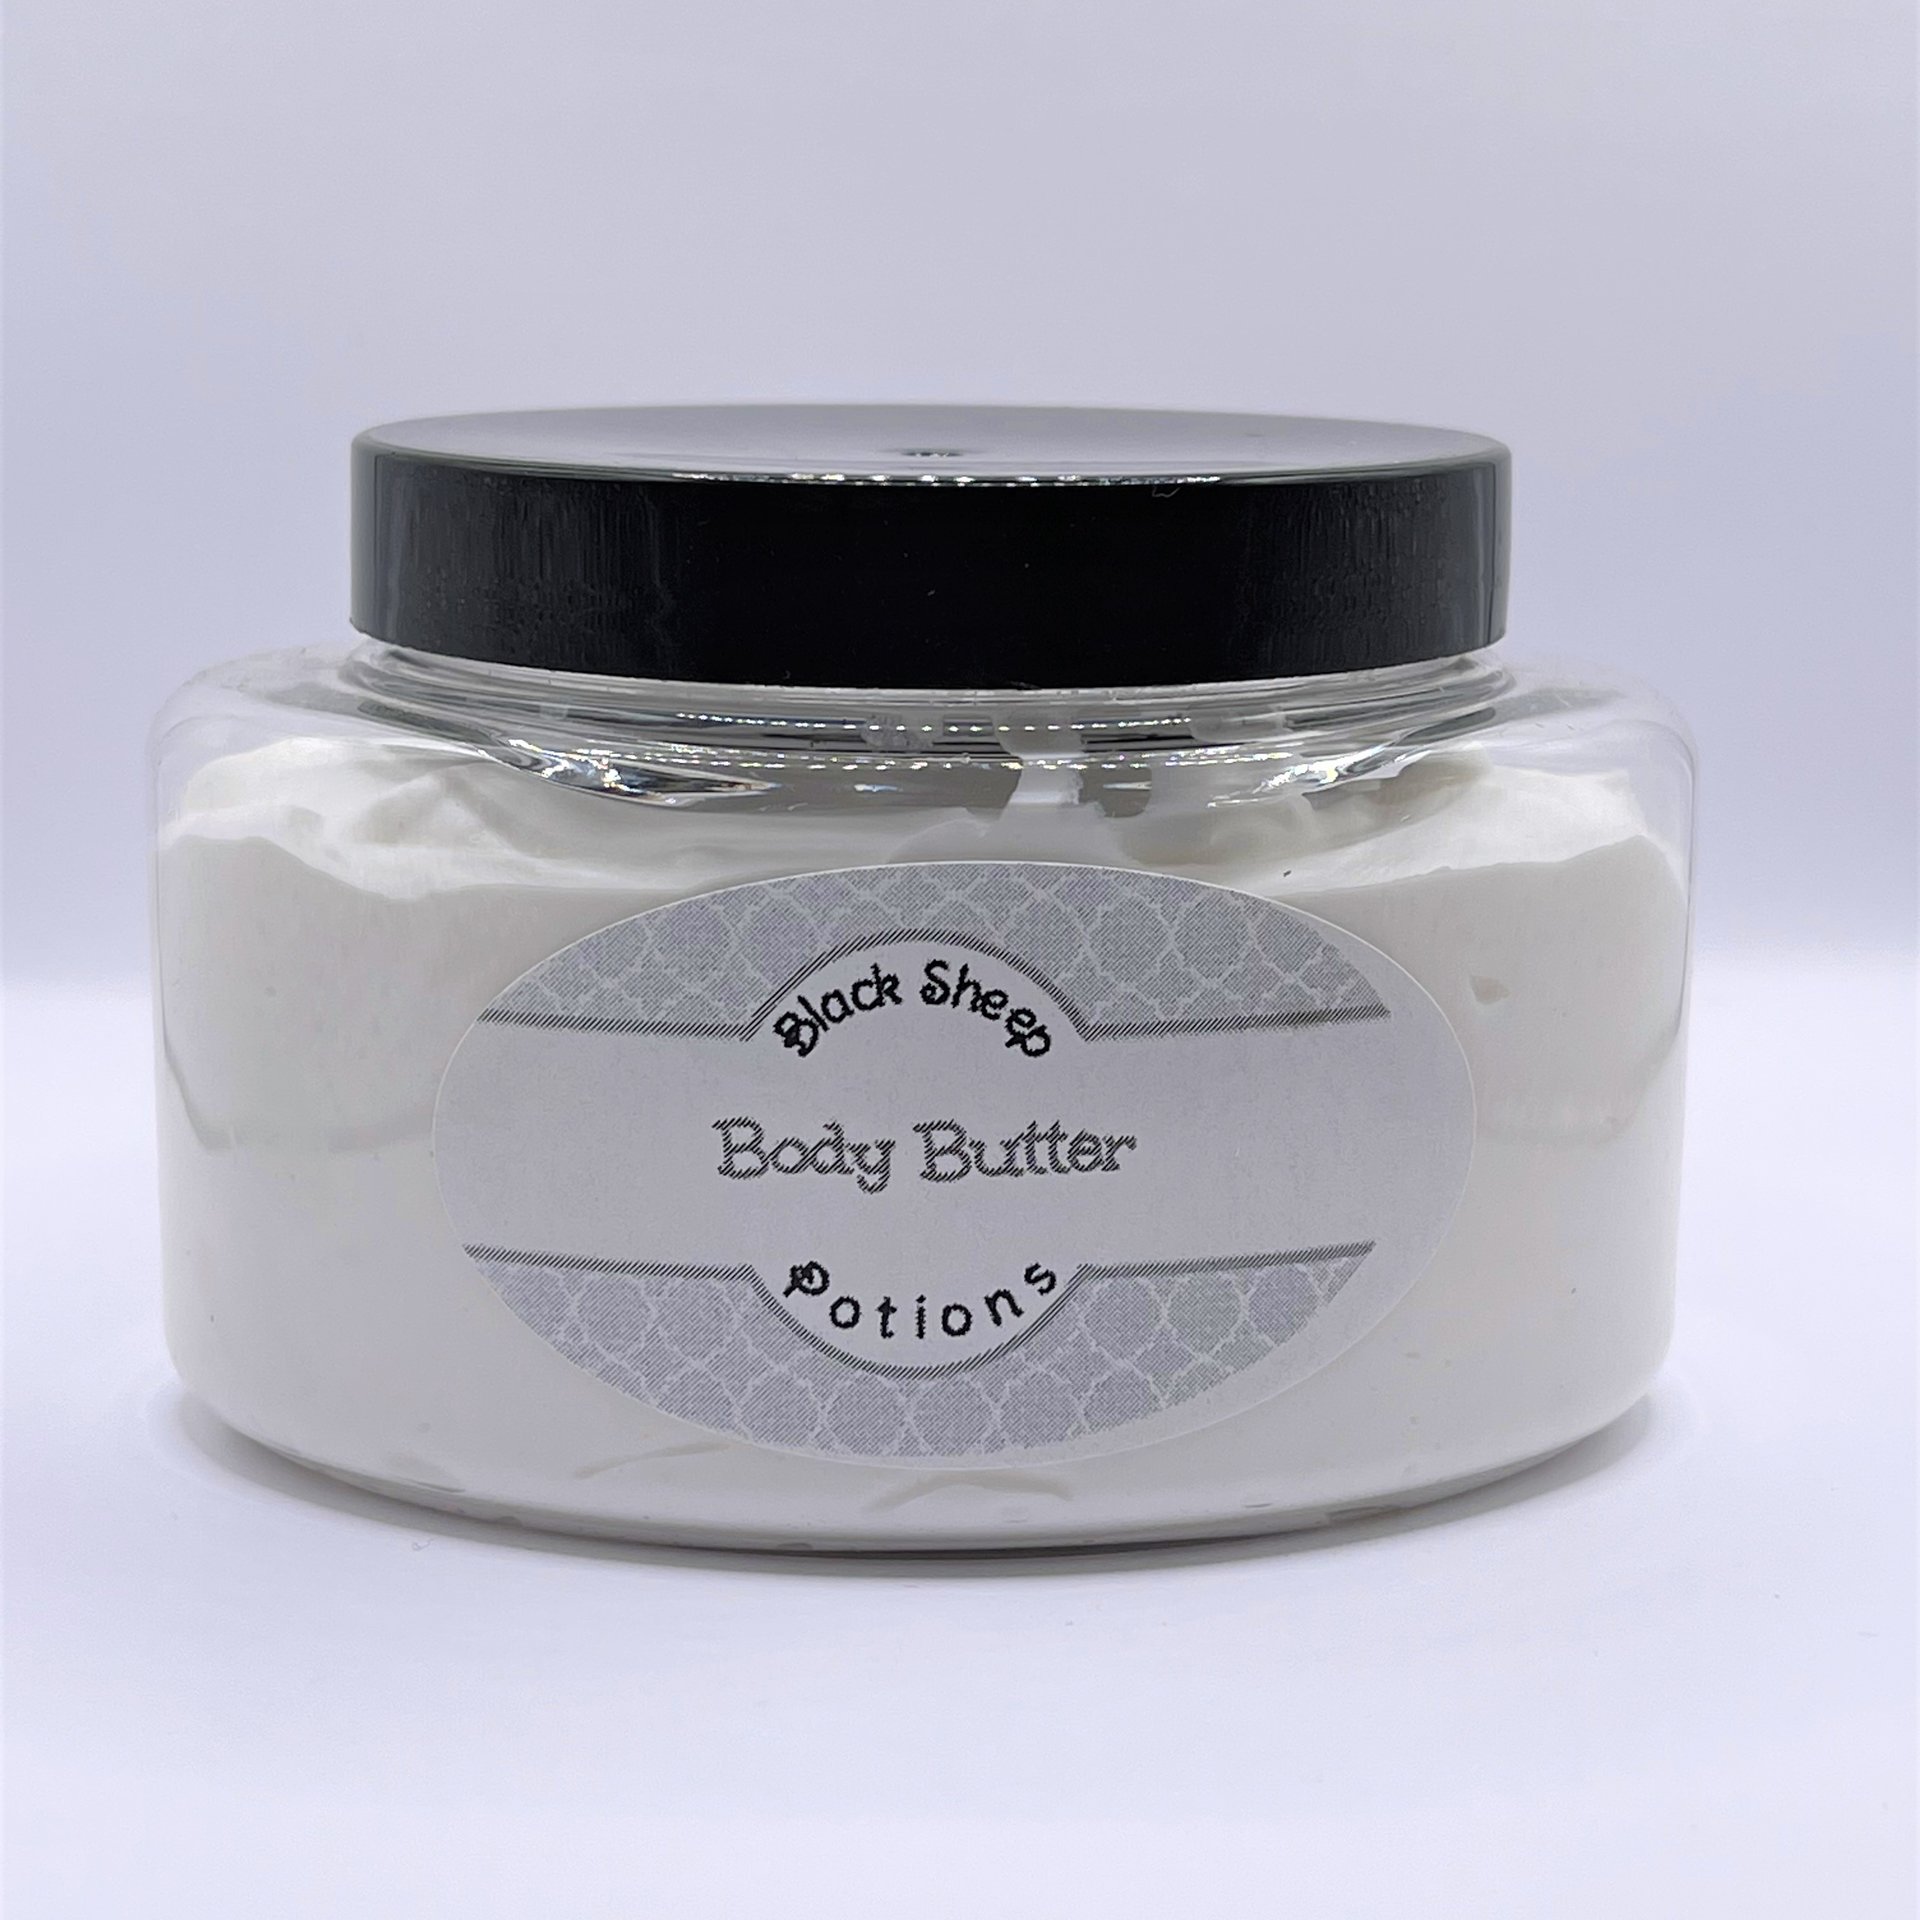 Whipped Body Butter, 3 oz